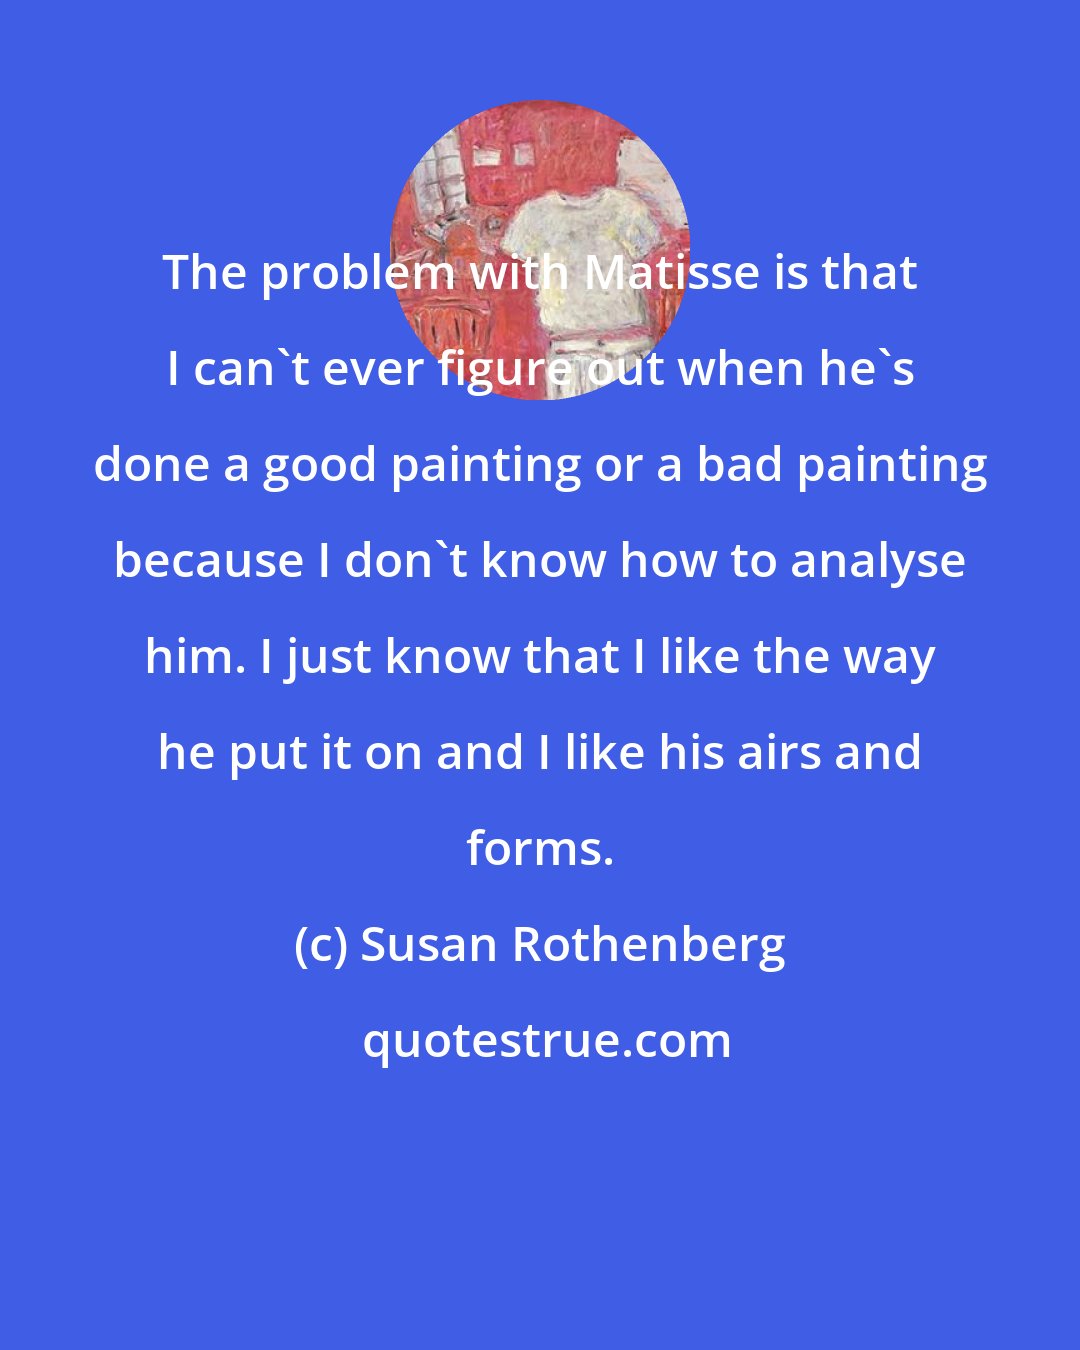 Susan Rothenberg: The problem with Matisse is that I can't ever figure out when he's done a good painting or a bad painting because I don't know how to analyse him. I just know that I like the way he put it on and I like his airs and forms.